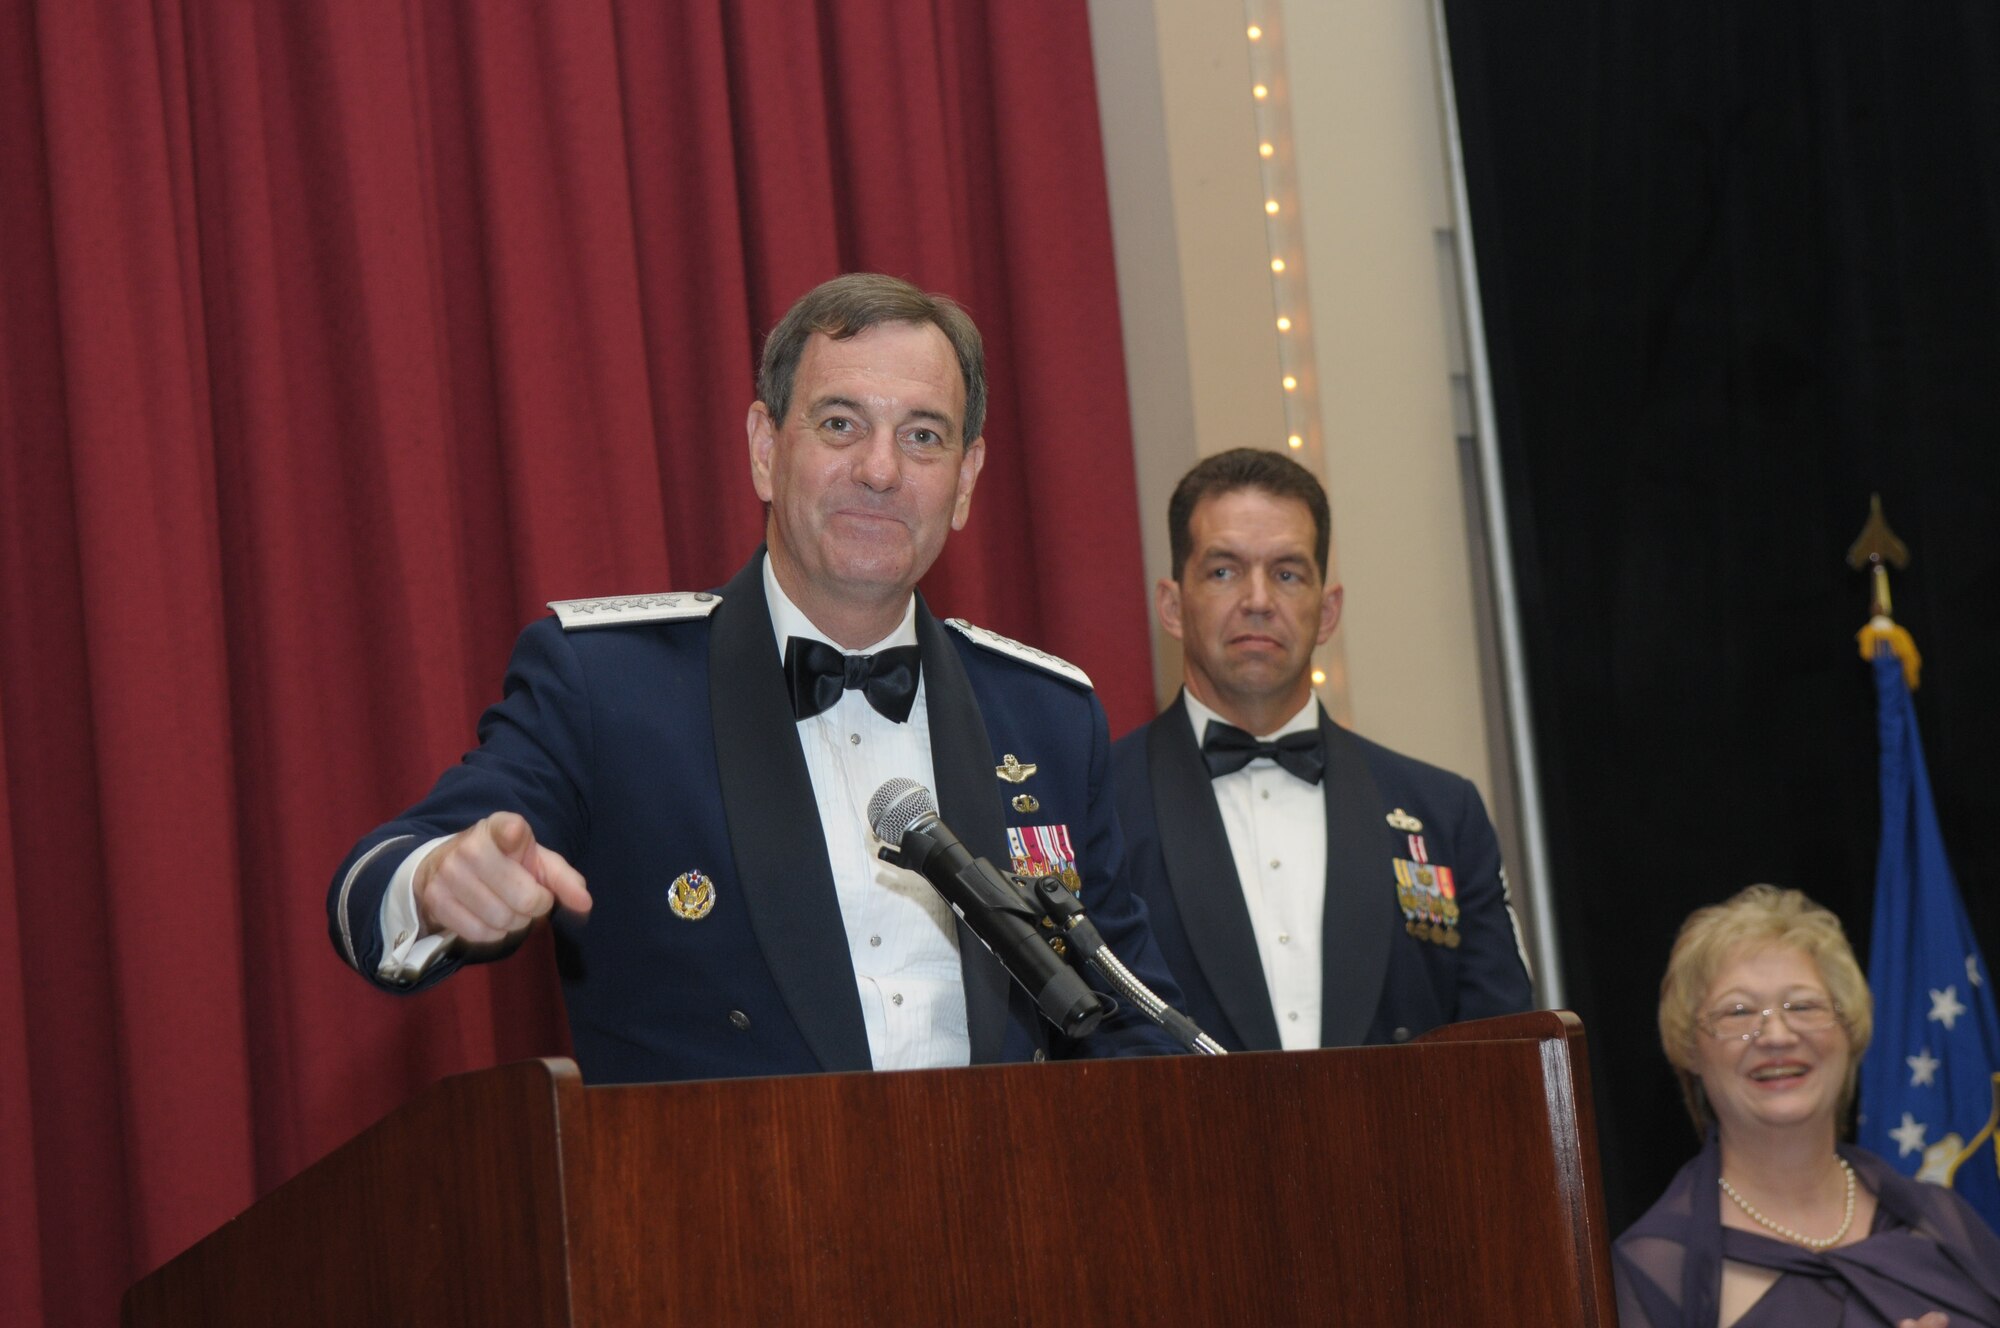 General Stephen R. Lorenz, Commander, Air Education and Training Command, addressed more than 300 AETC Airmen during his induction into the Order of Sword at the Gateway Club on Lackland AFB, July 16. The Order of the Sword is the highest honor and tribute noncommissioned officers can bestow upon an individual. General Lorenz is the sixth leader AETC Airmen have chosen to recognize by presenting the sword. (U.S. Air Force photo/Joel Martinez)